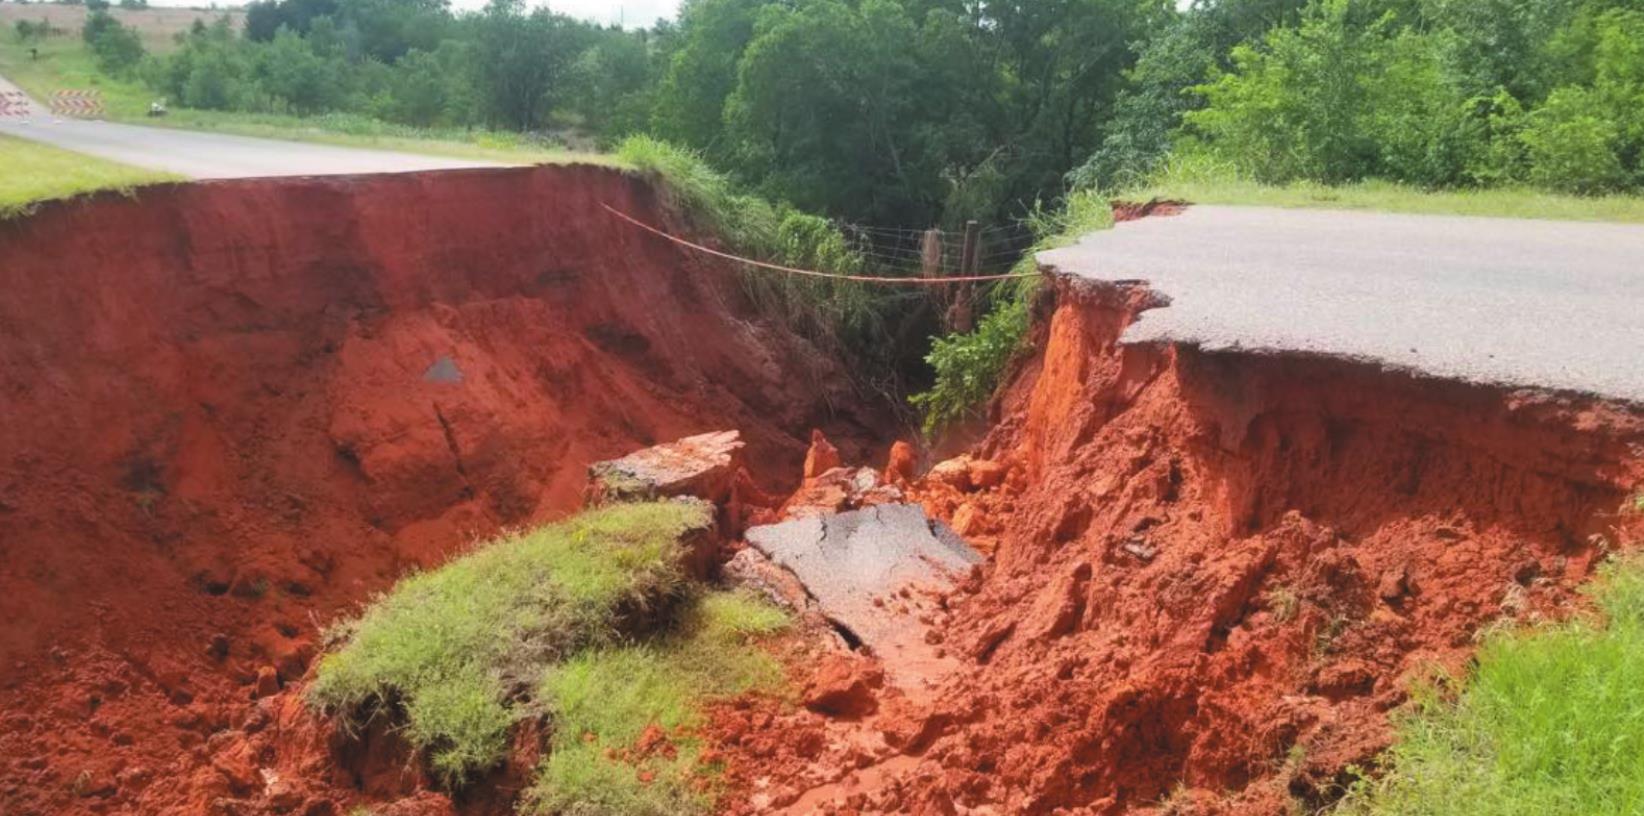 Rains last Monday and Tuesday wash out part of County Road 1040 east of County Road 2400 and south of Weatherford. Custer County commissioners discussed damage, during Monday’s meeting in Arapaho. Read full story on Page 11A. Provided